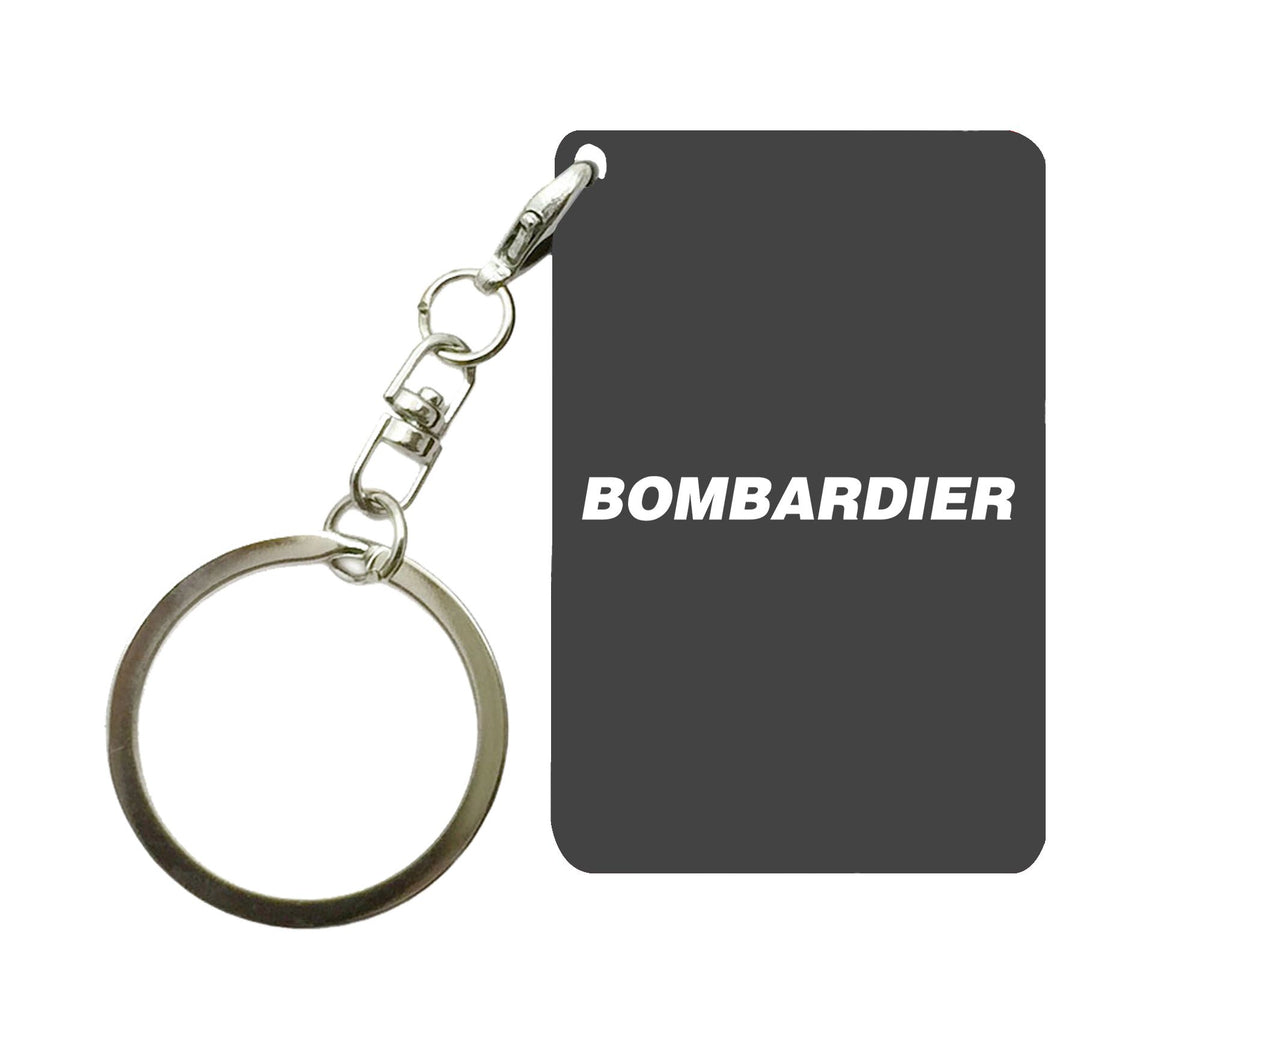 Bombardier & Text Designed Key Chains